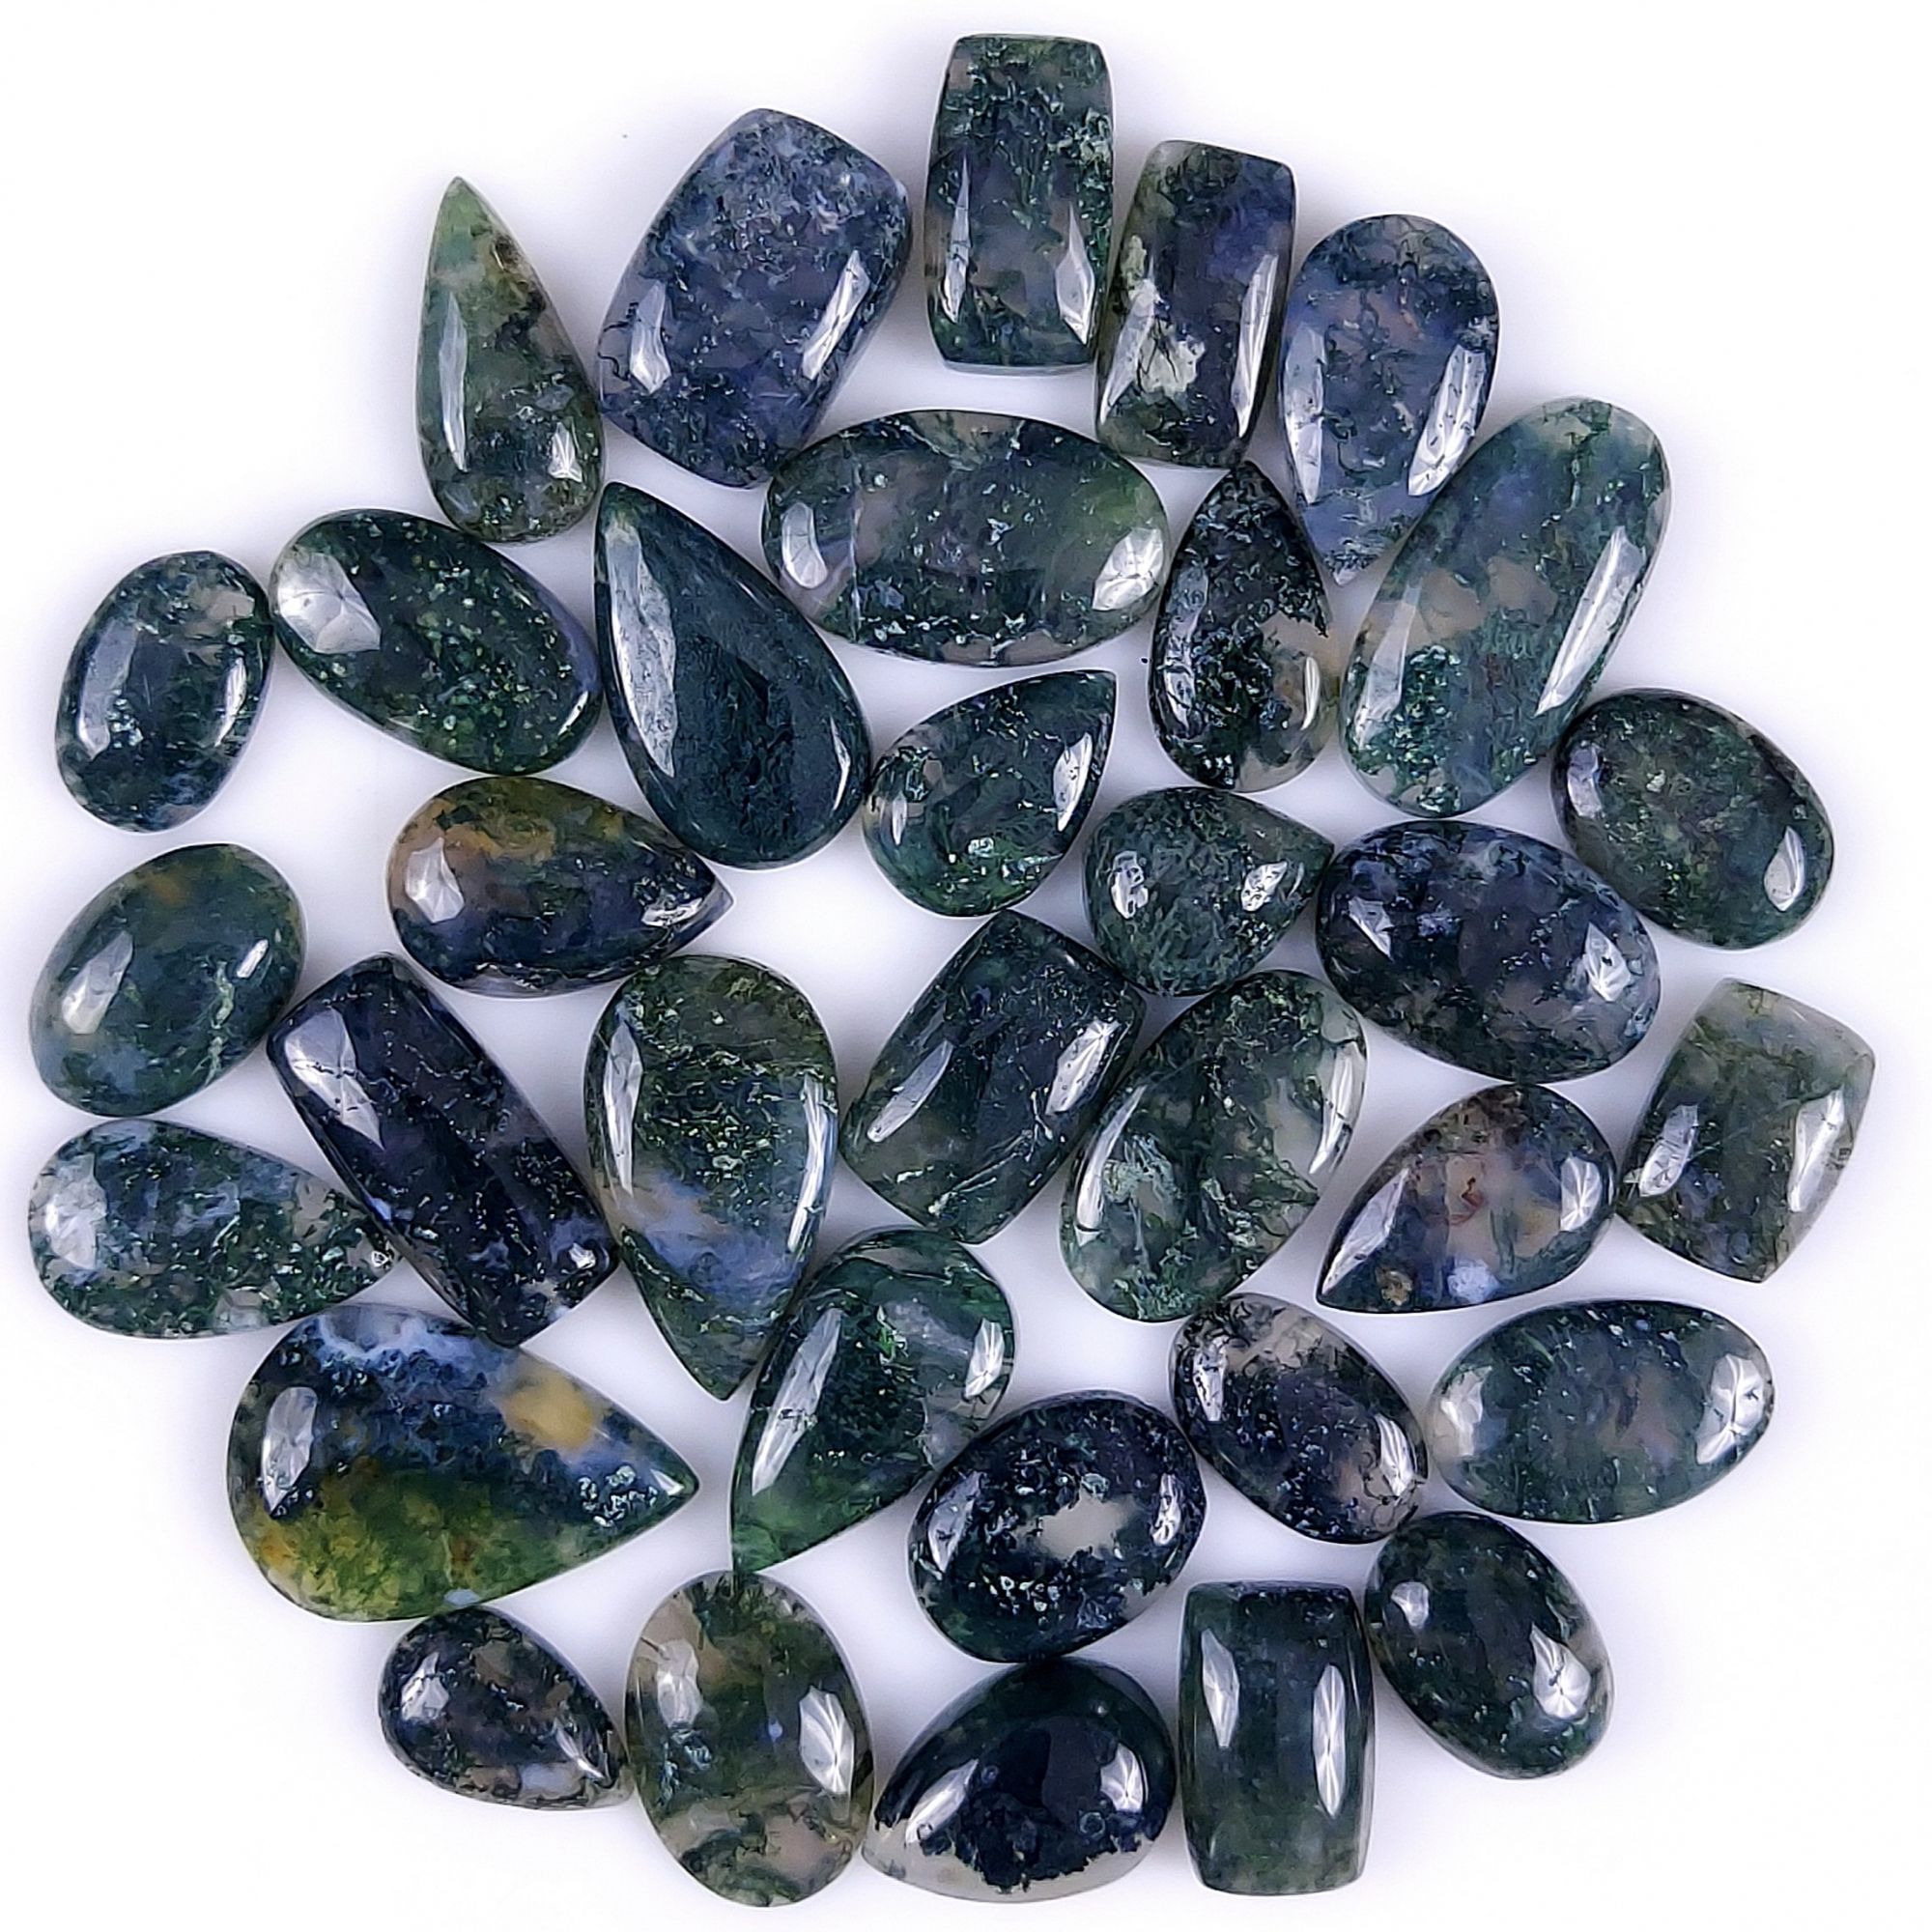 34Pcs 204Cts Natural Green Moss Agate Cabochon Lots Mixed Shapes And Sizes Moss Agate loose gemstone Cabochon Wholesale Lot 18x12 10x6mm#G-366